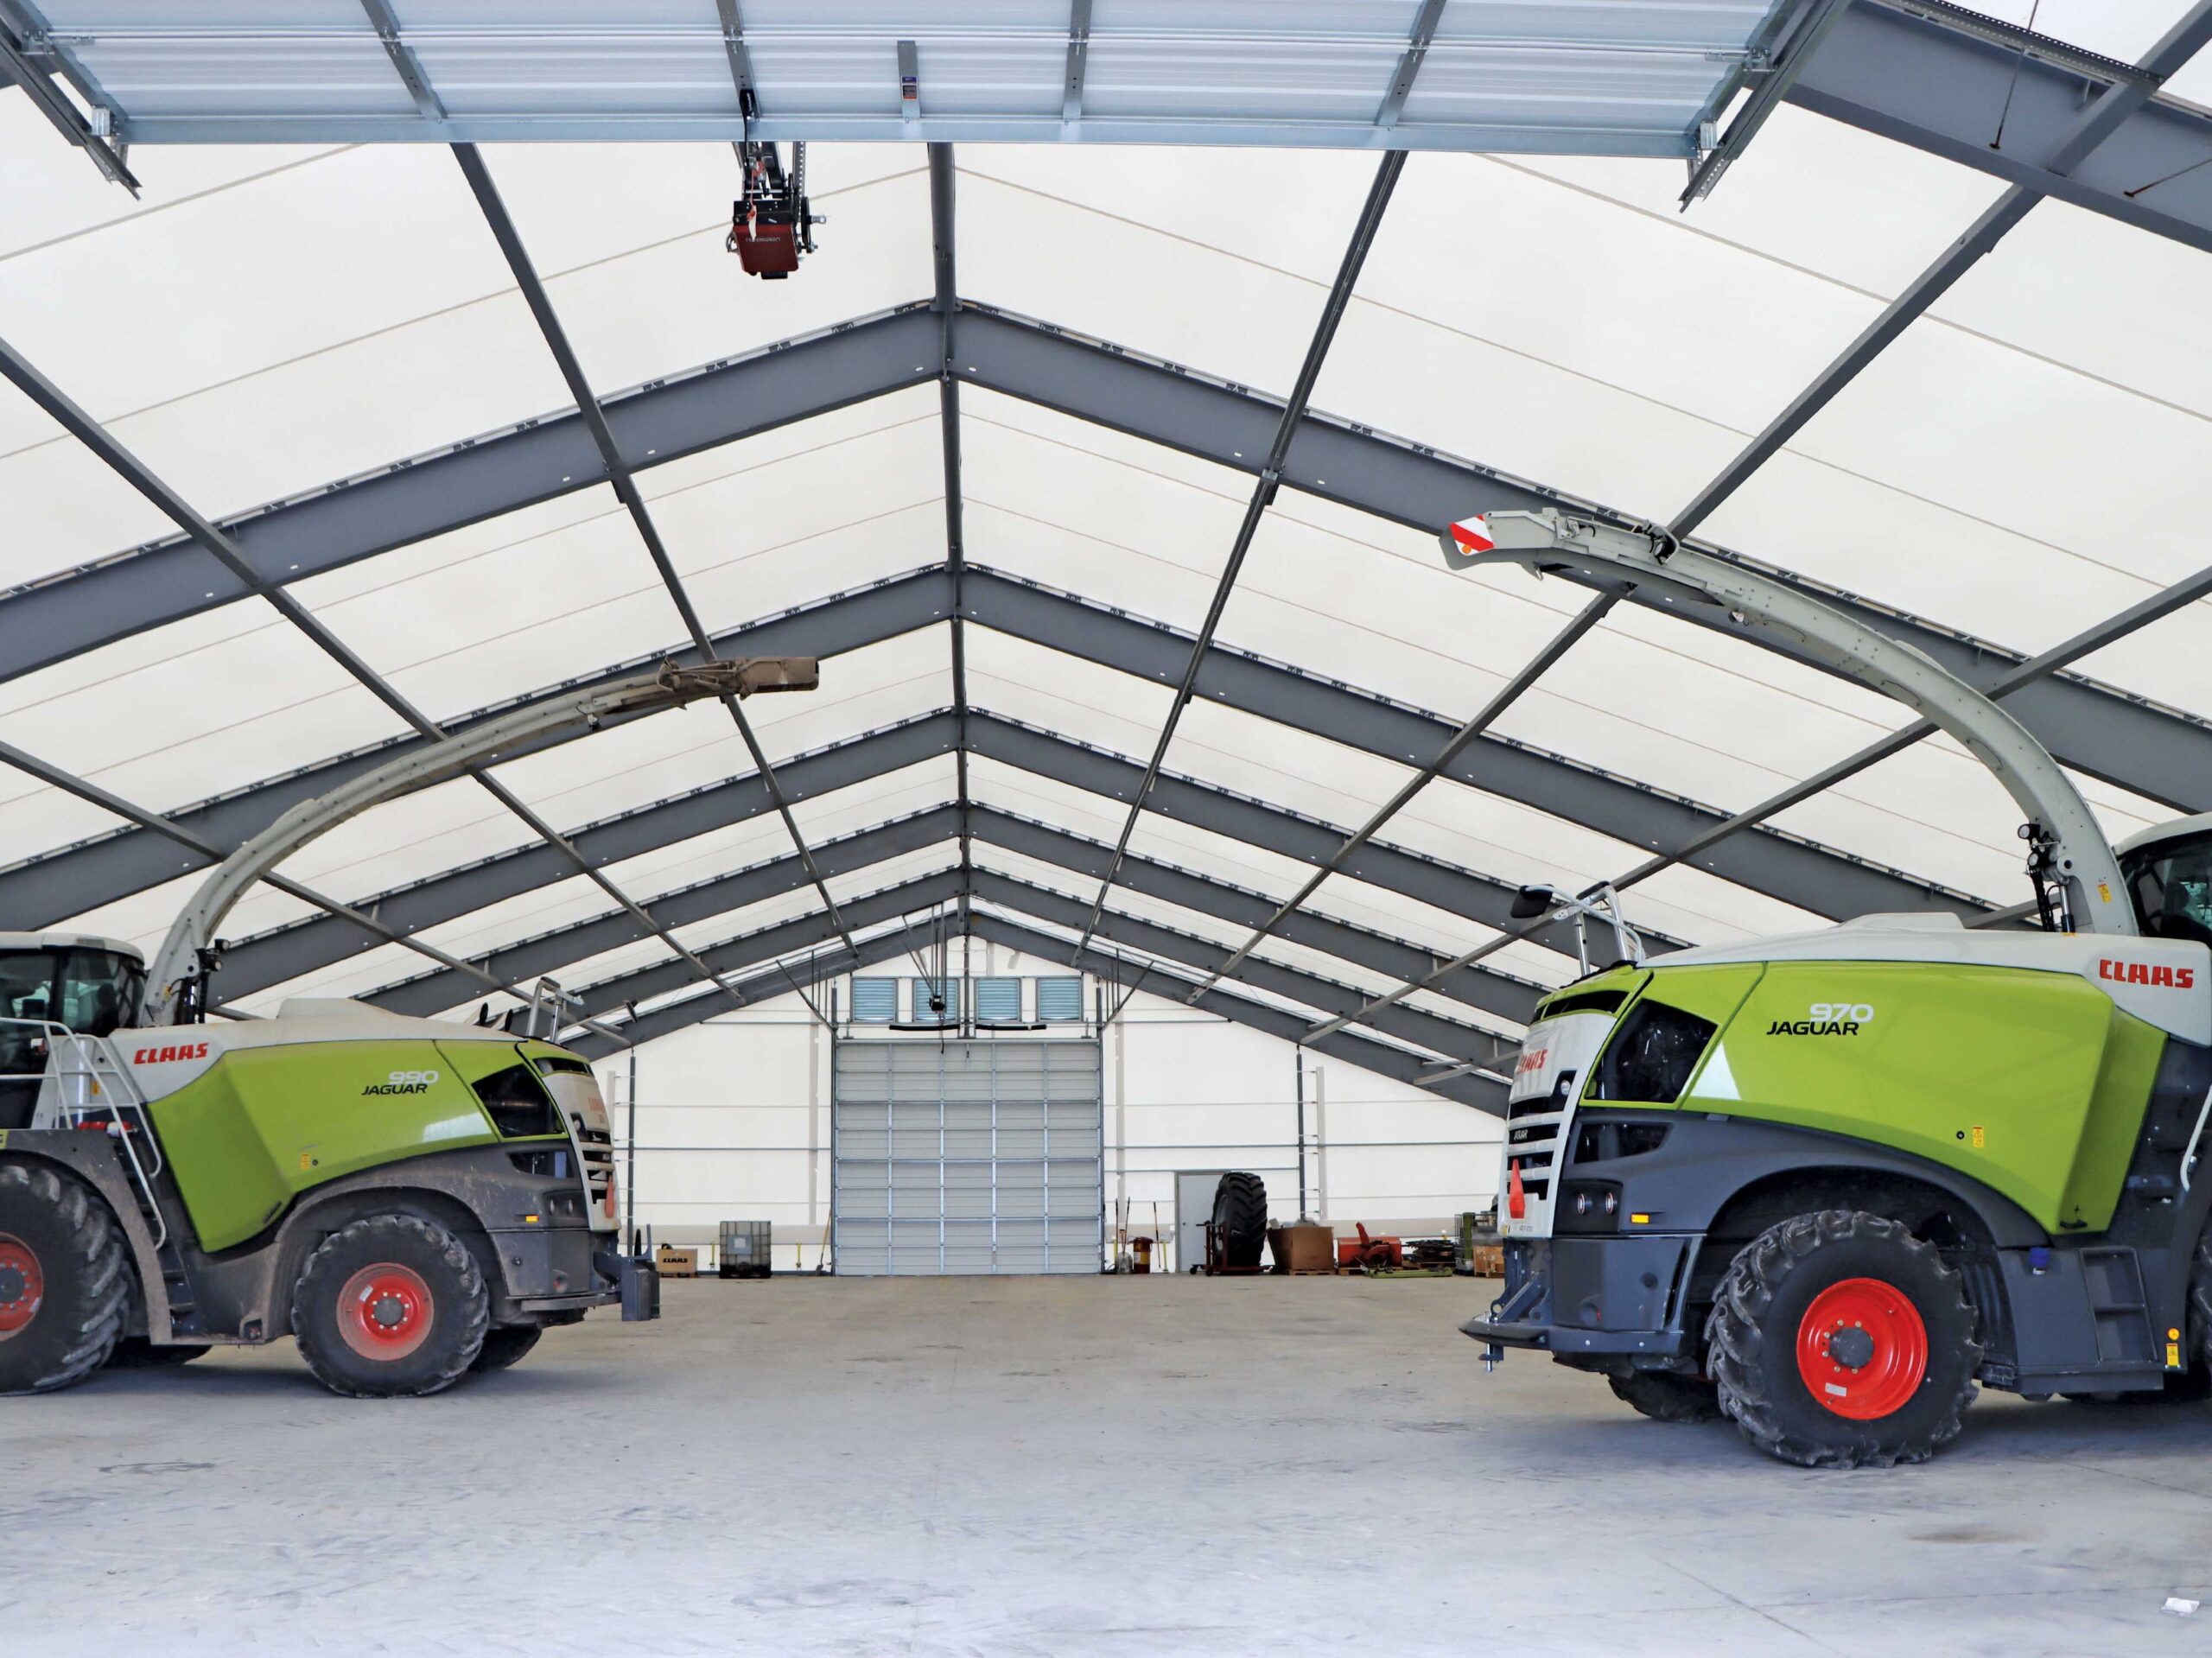 I-Beam Fabric Structure With Stored Vehicles